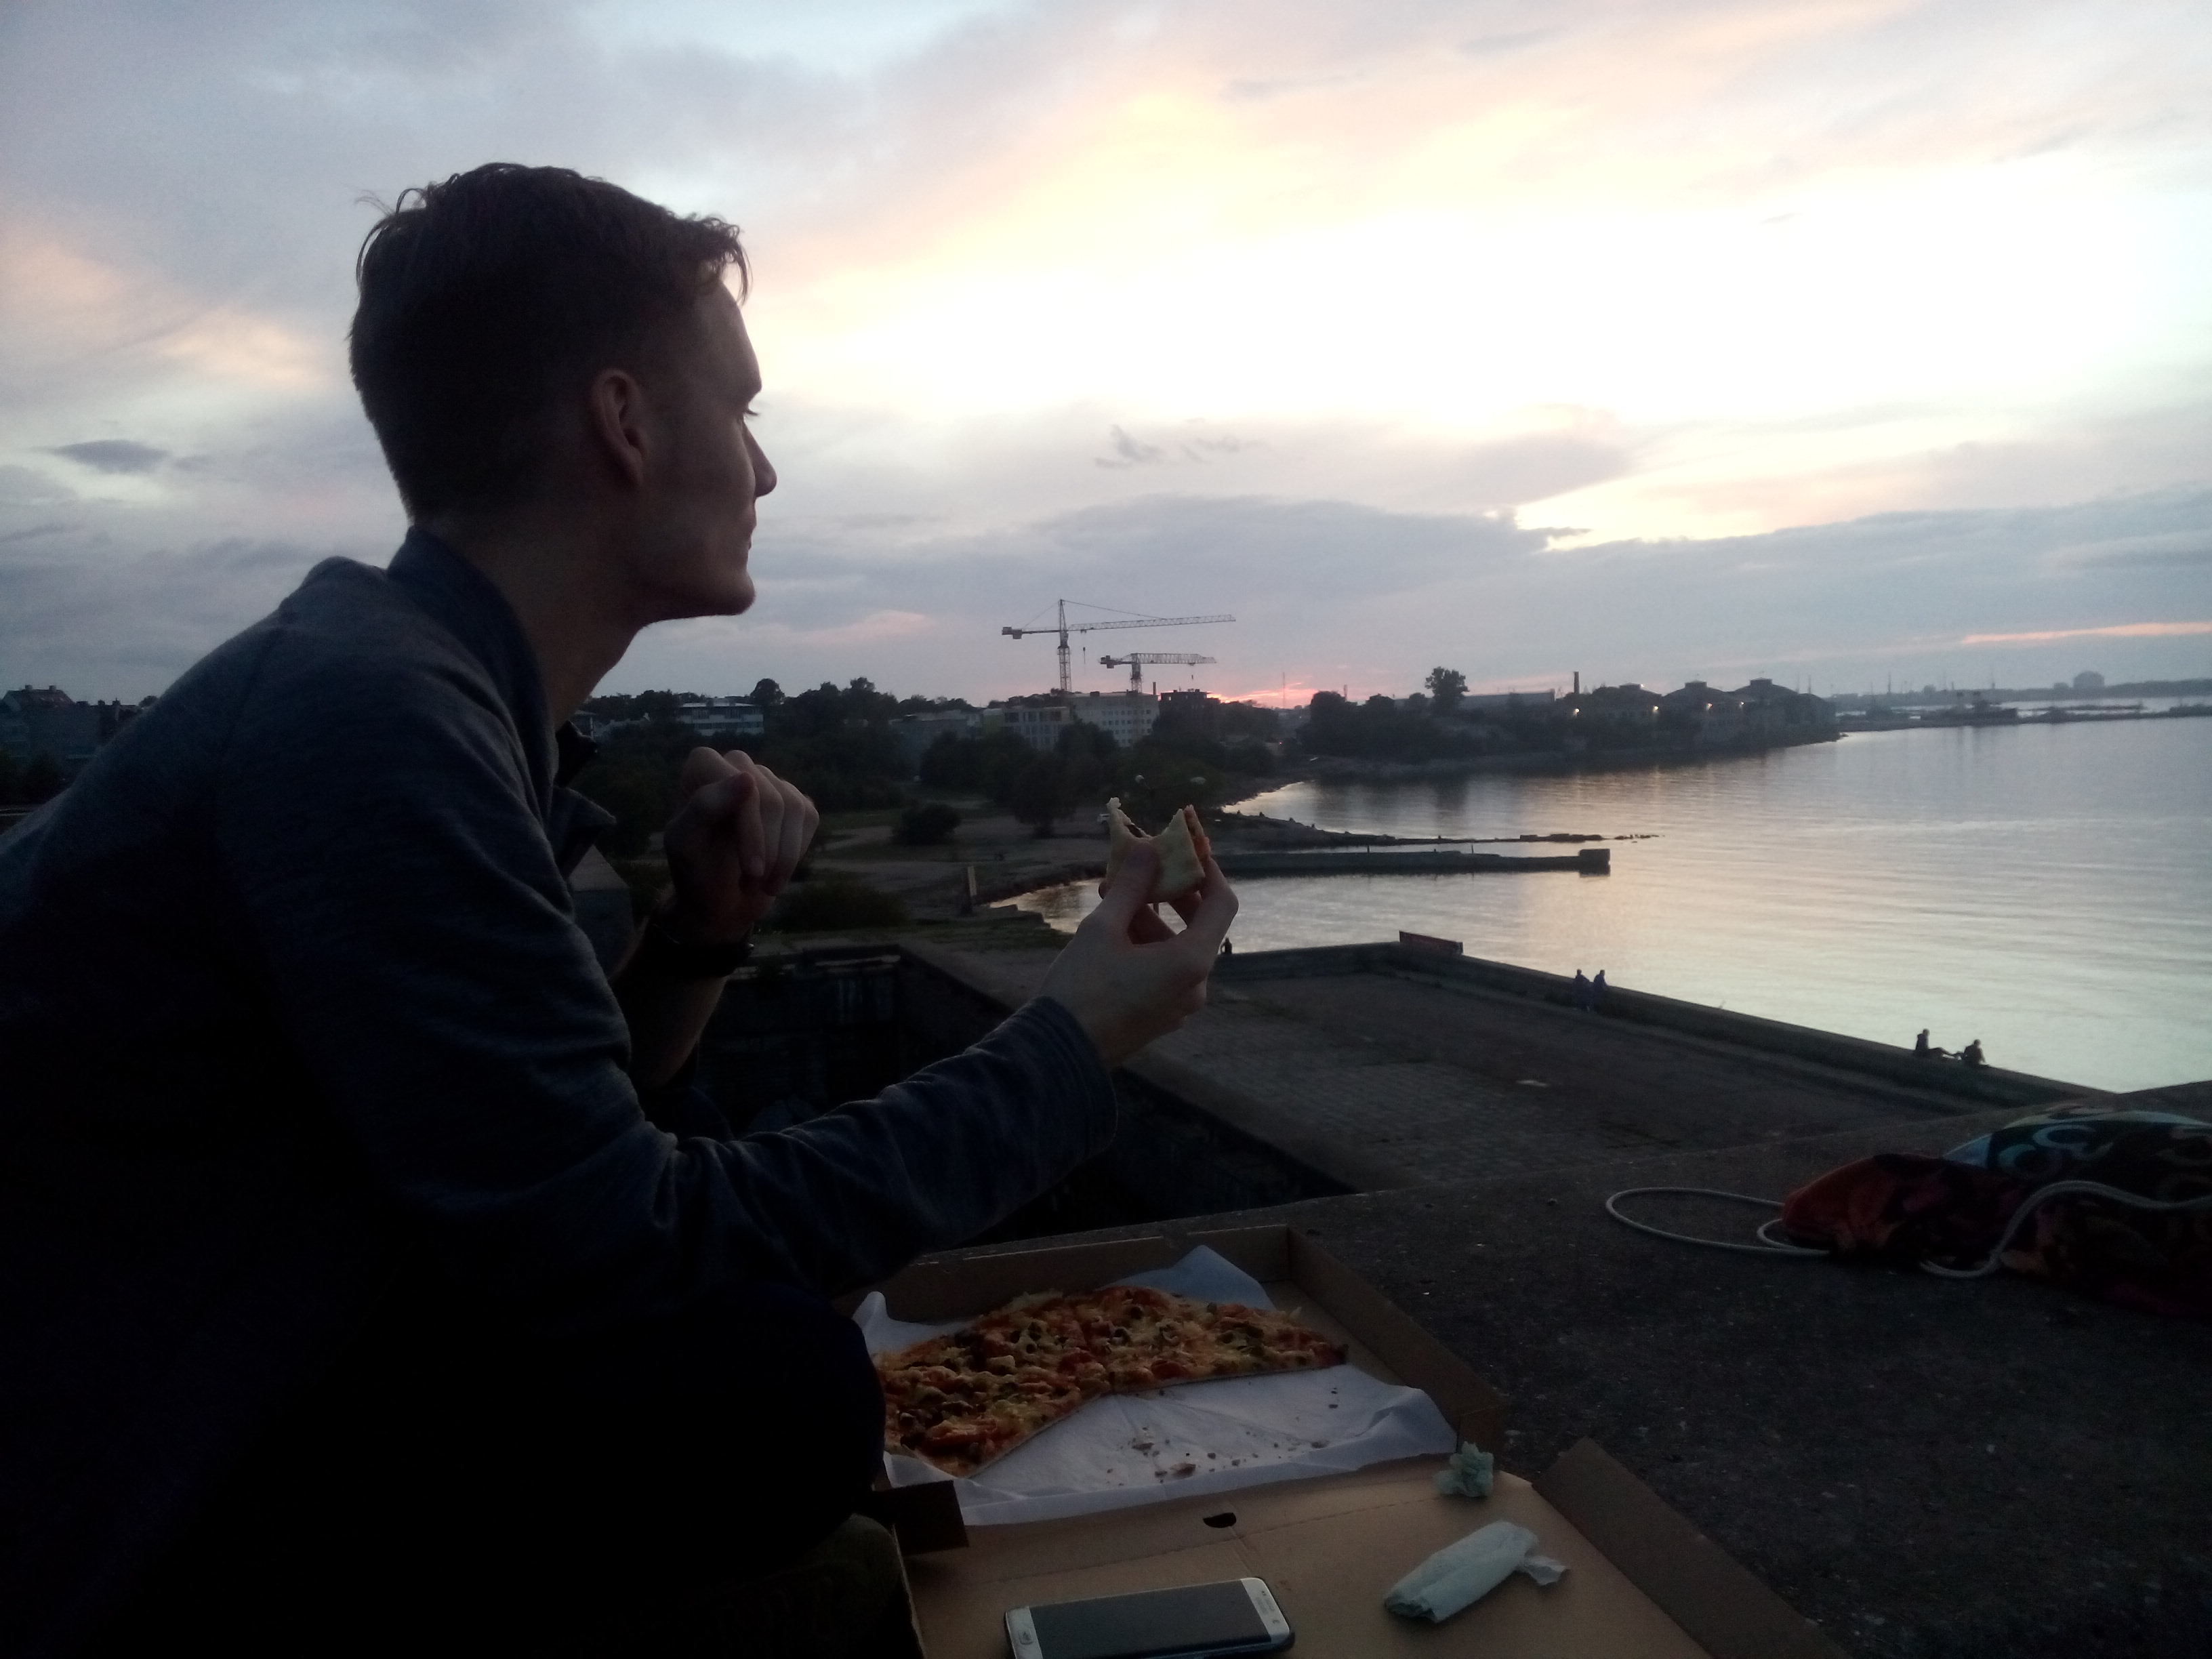 A guy with short hair eats pizza from a box looking out of water and sunset